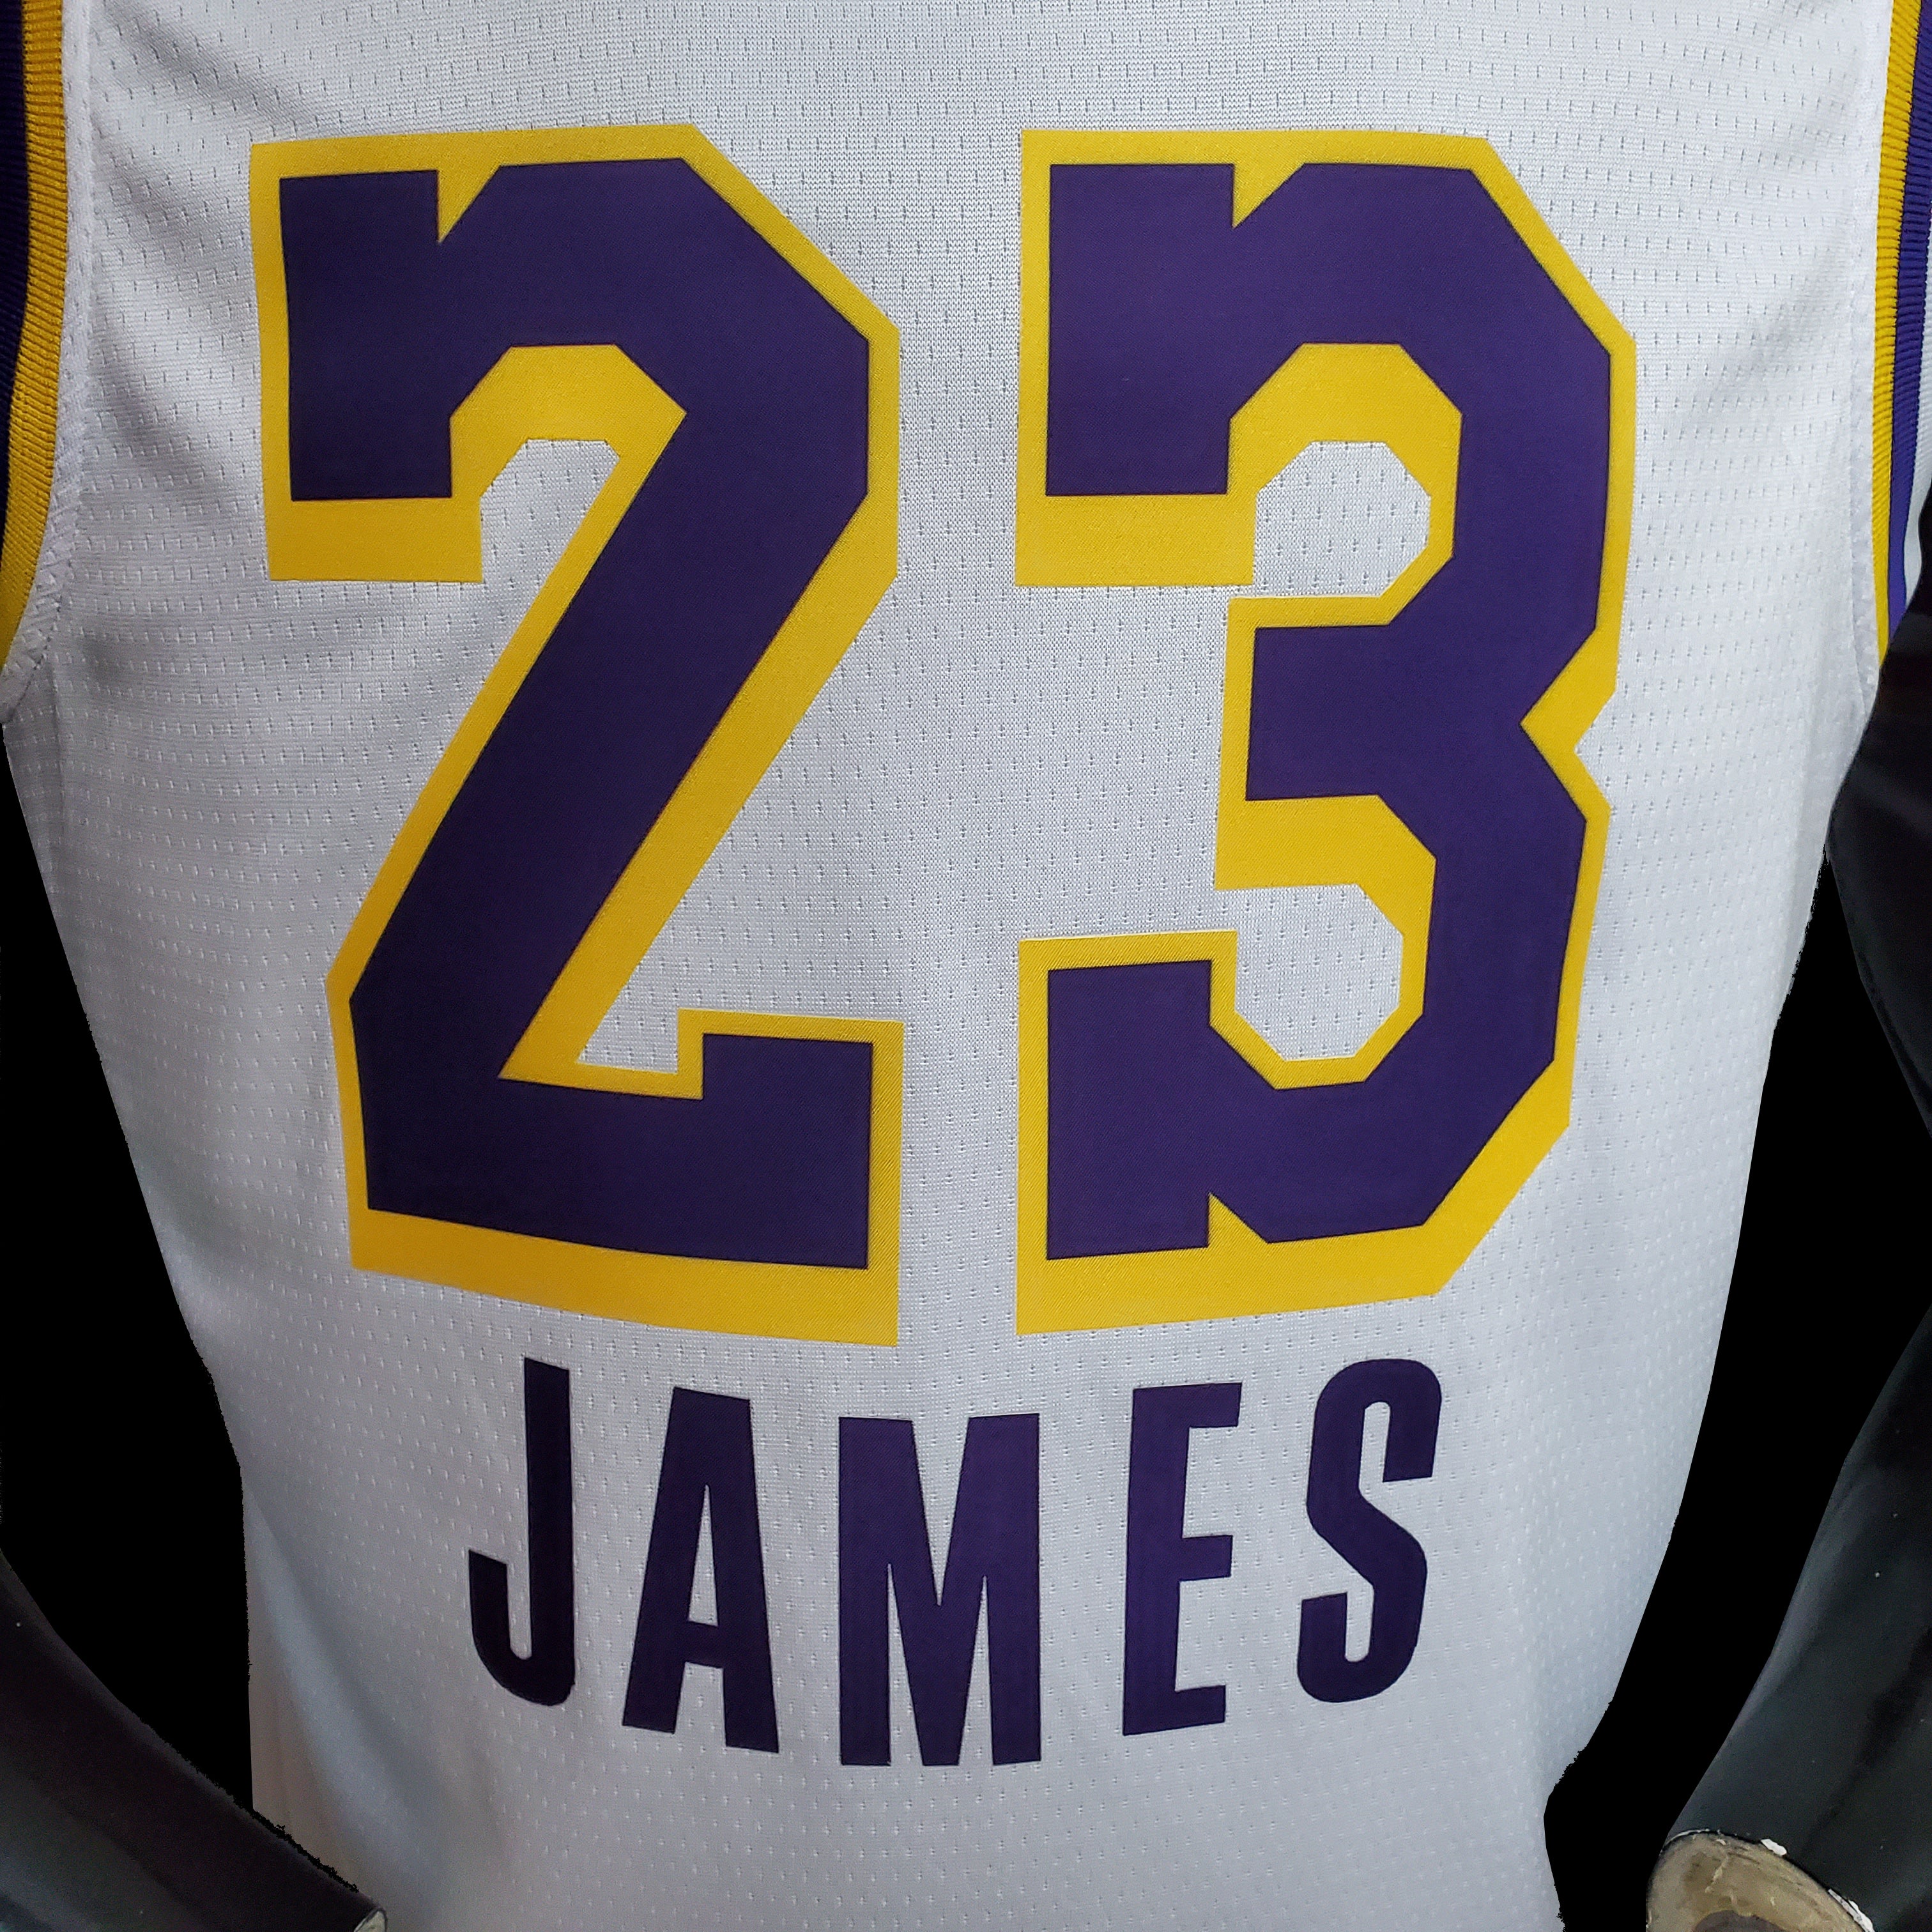 Angeles Lakers Lebron James Customize of Name White Jersey